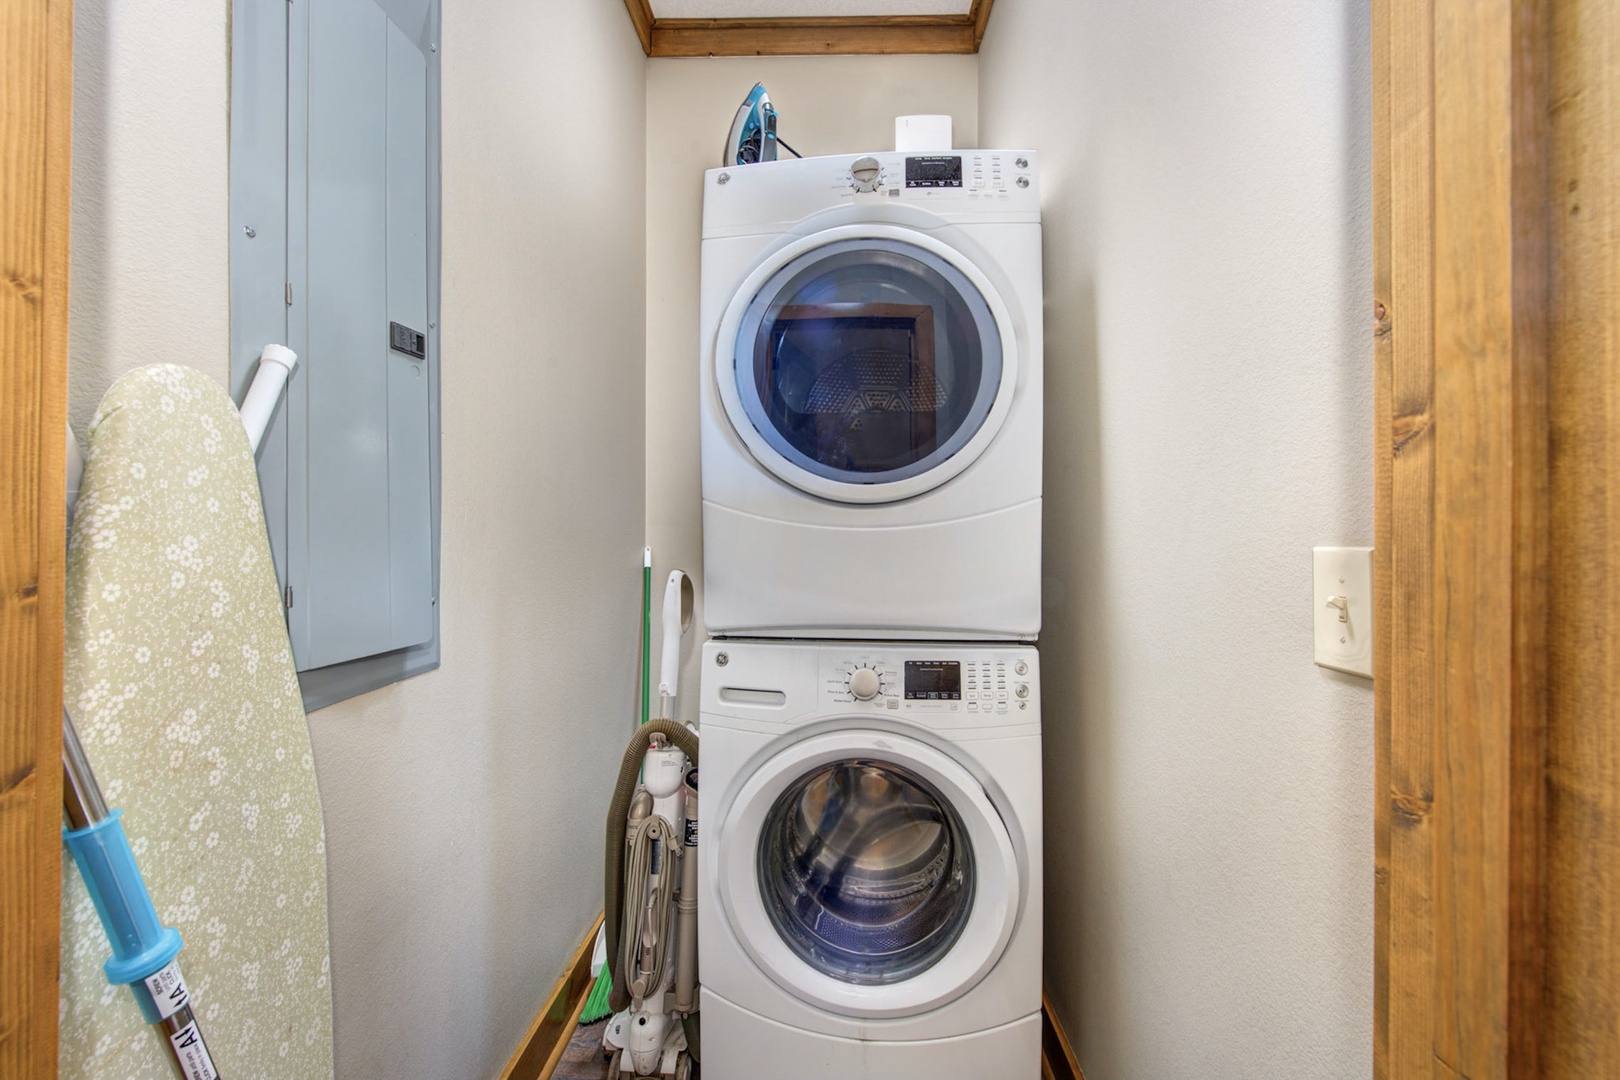 Private laundry is conveniently tucked away in a dedicated closet